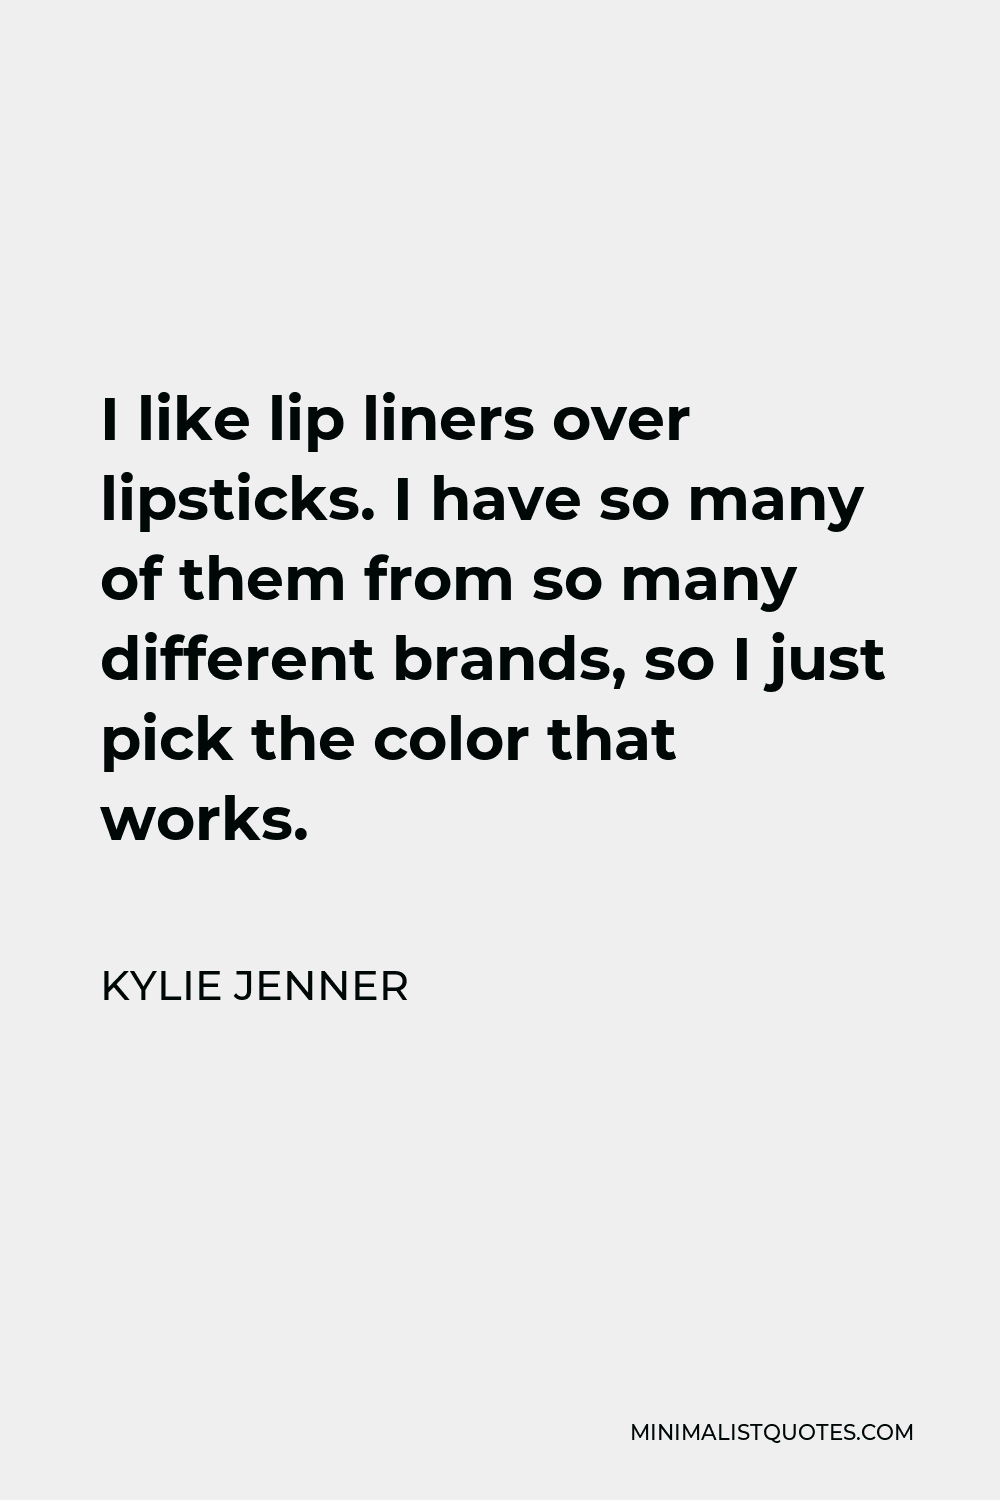 Kylie Jenner Quote - I like lip liners over lipsticks. I have so many of them from so many different brands, so I just pick the color that works.